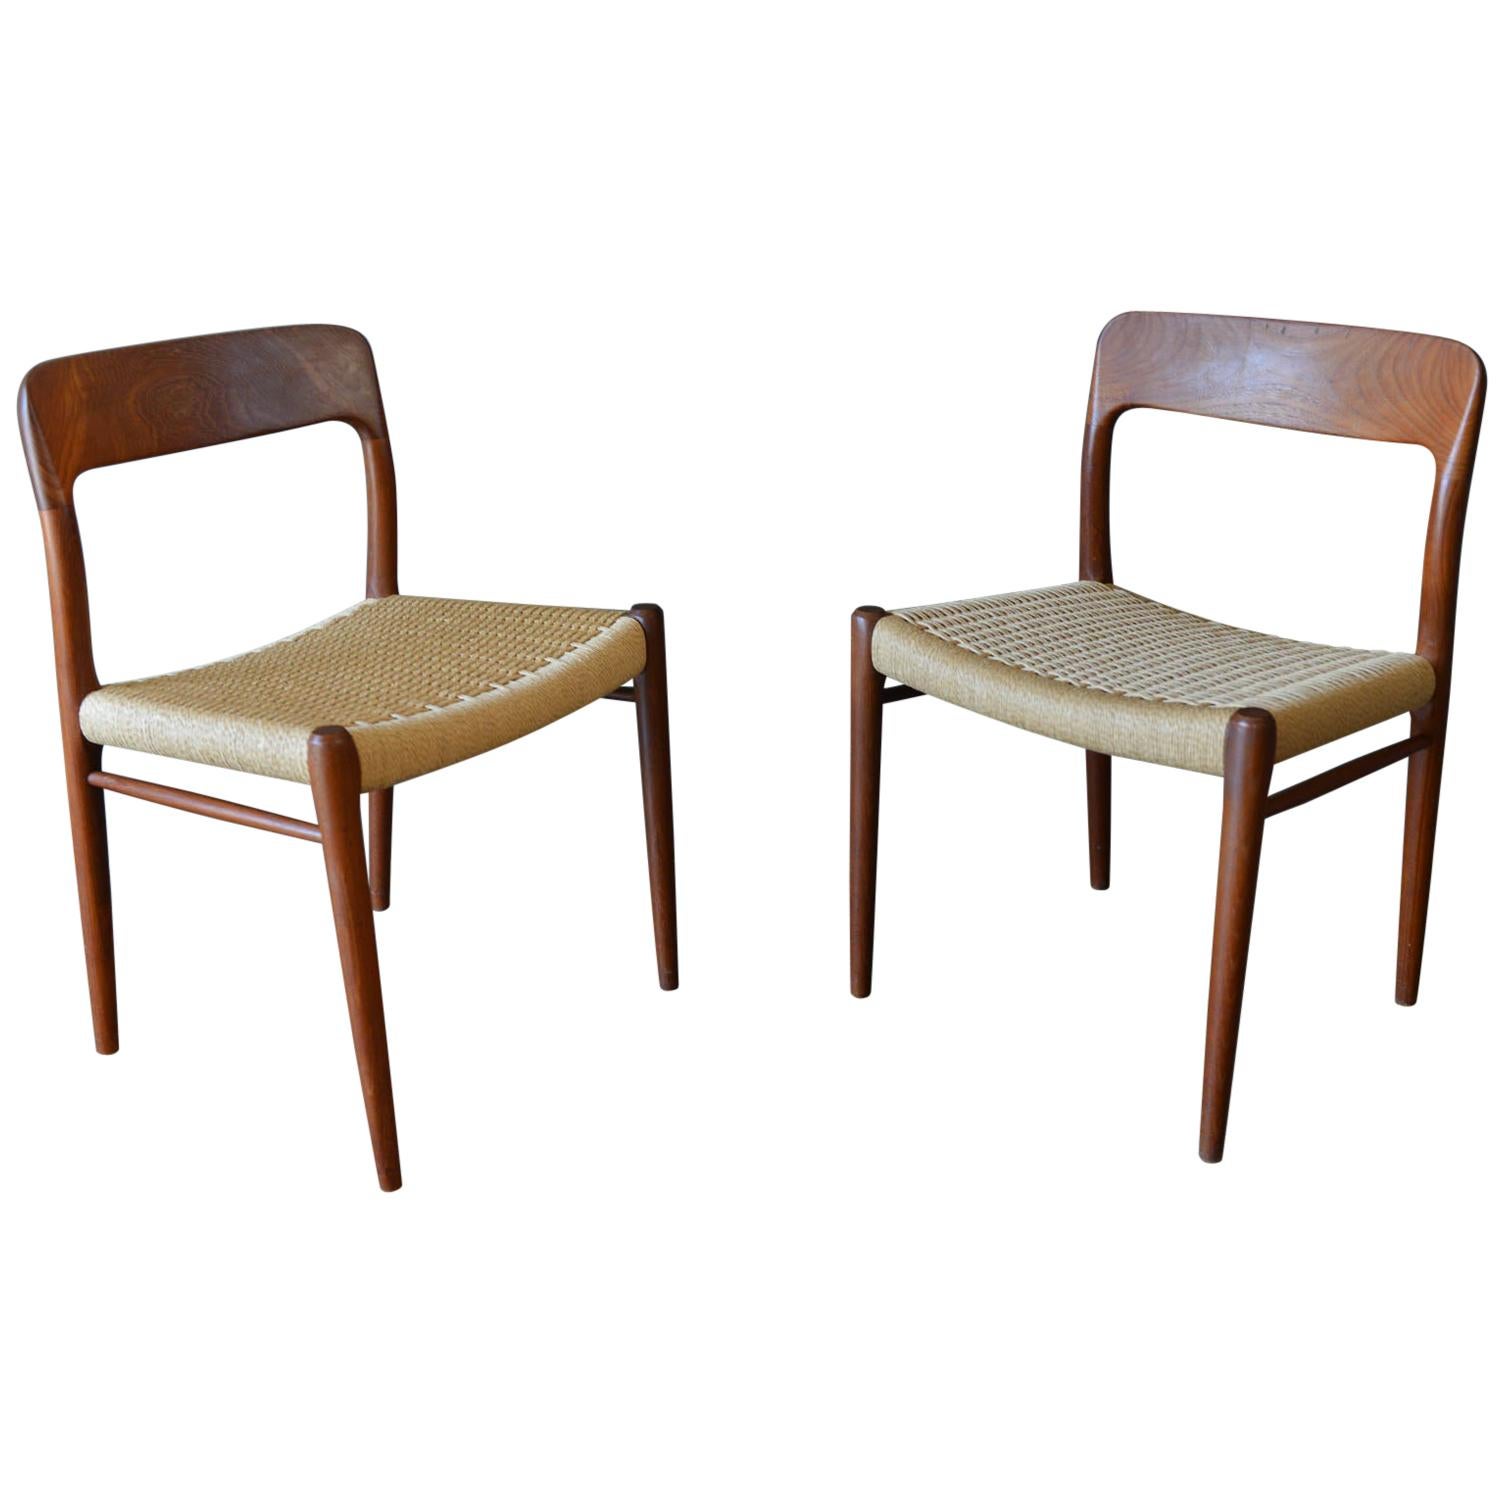 Pair of Niels Moller Side or Dining Chairs, Model 75, circa 1960